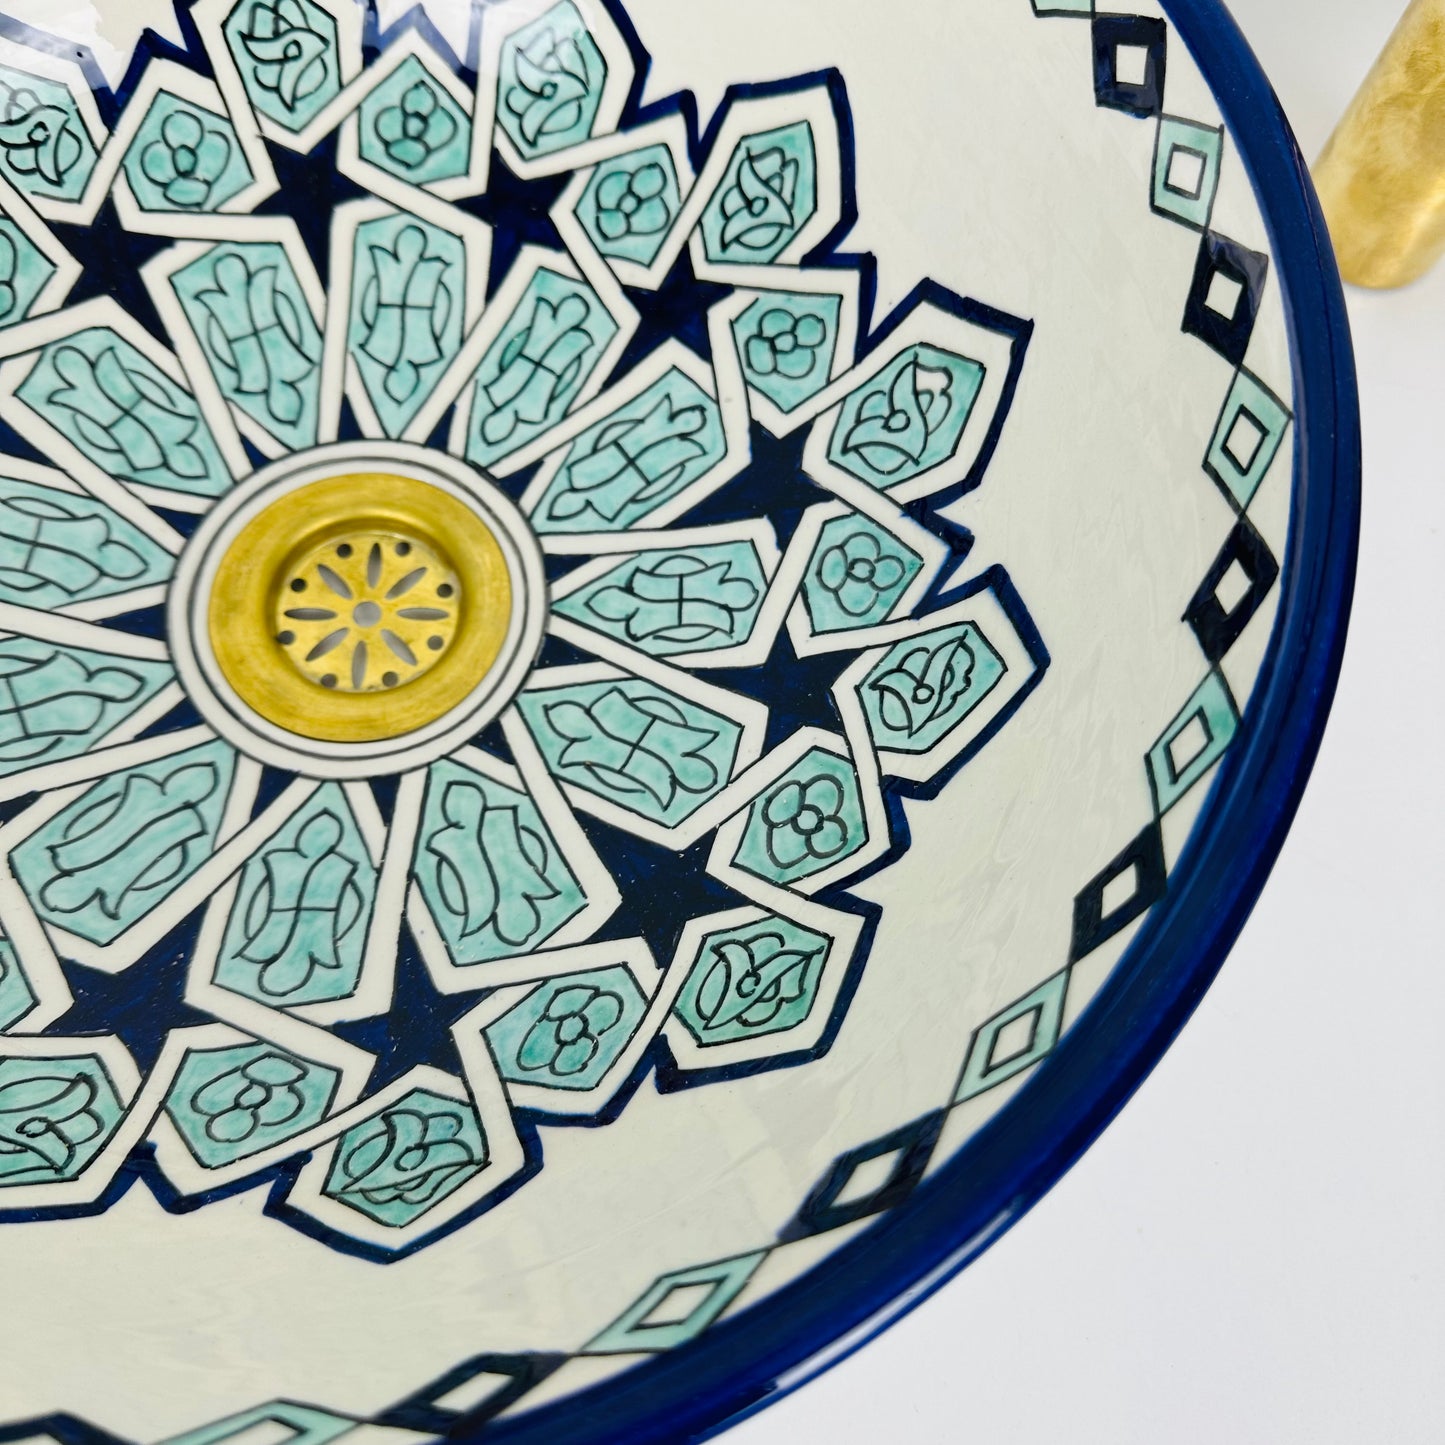 Oceanic Symphony: Handcrafted Ceramic Sink with Variegated Blues and Hand-Painted Shapes